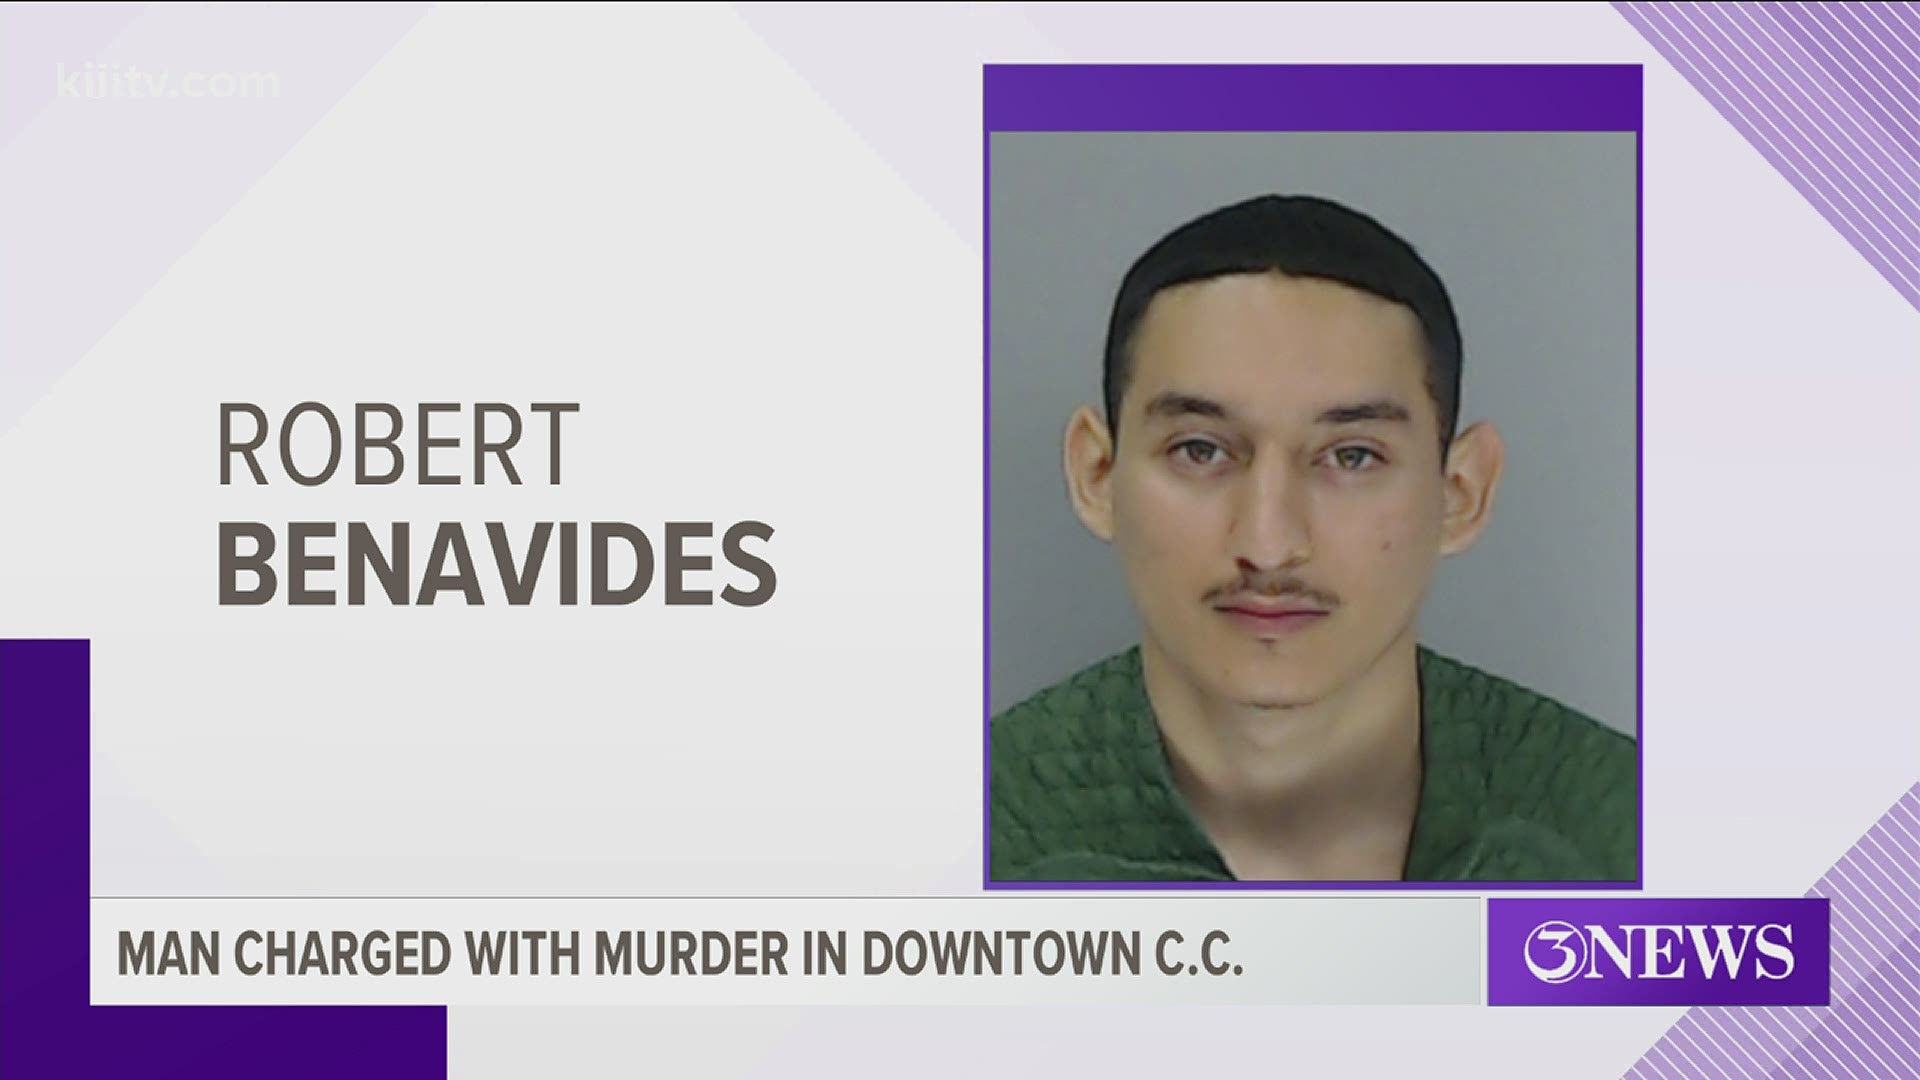 20-year-old Robert Benavides has been arrested and charged with murder. His bond is set at $500,000.